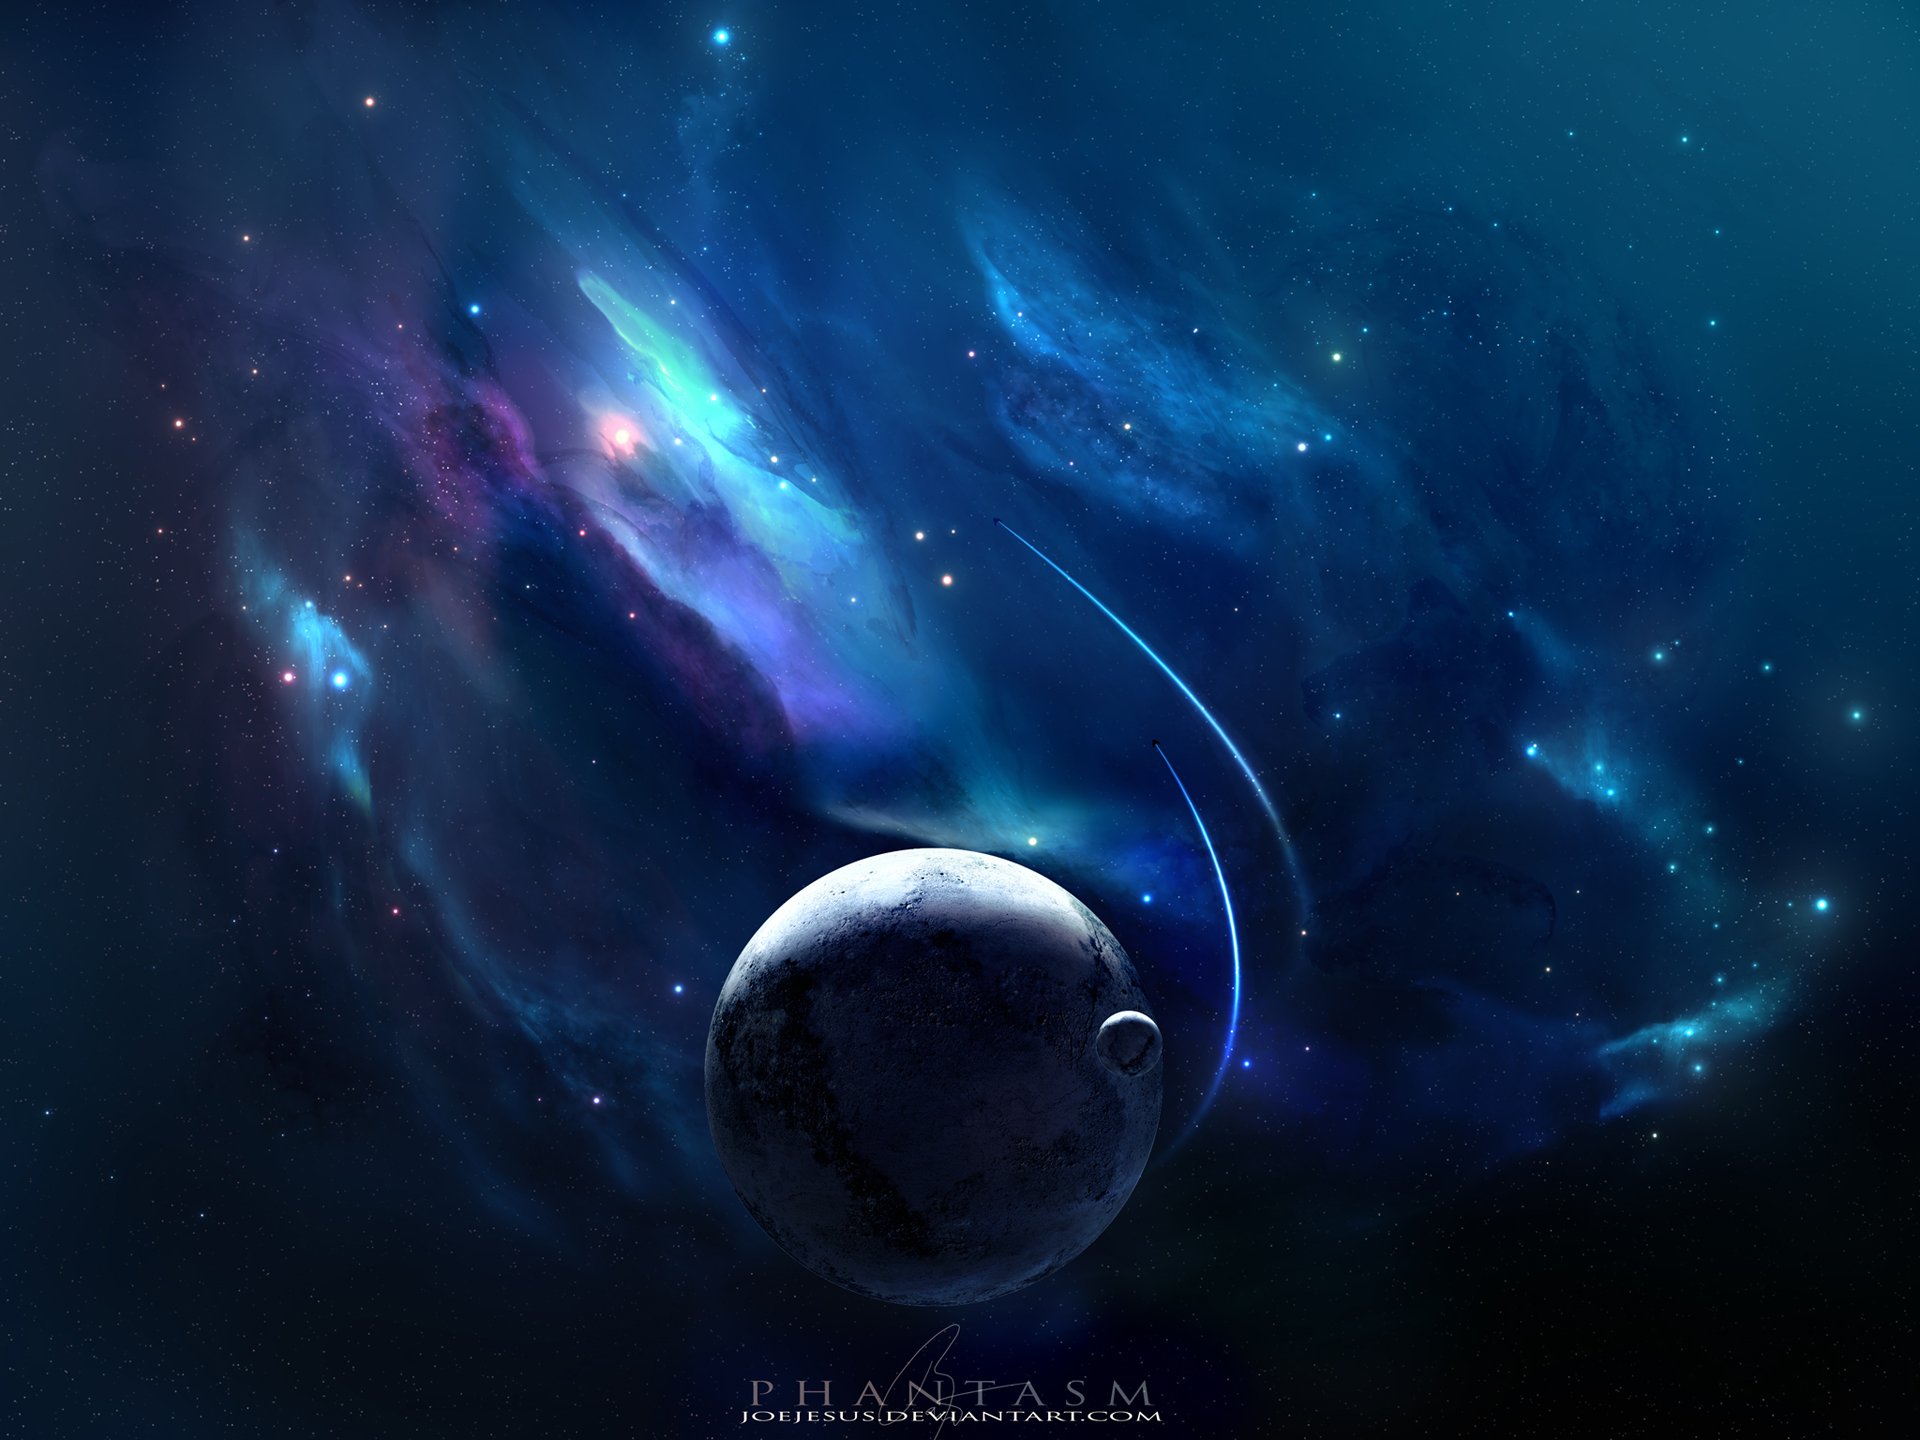 1440p Wallpaper Space On